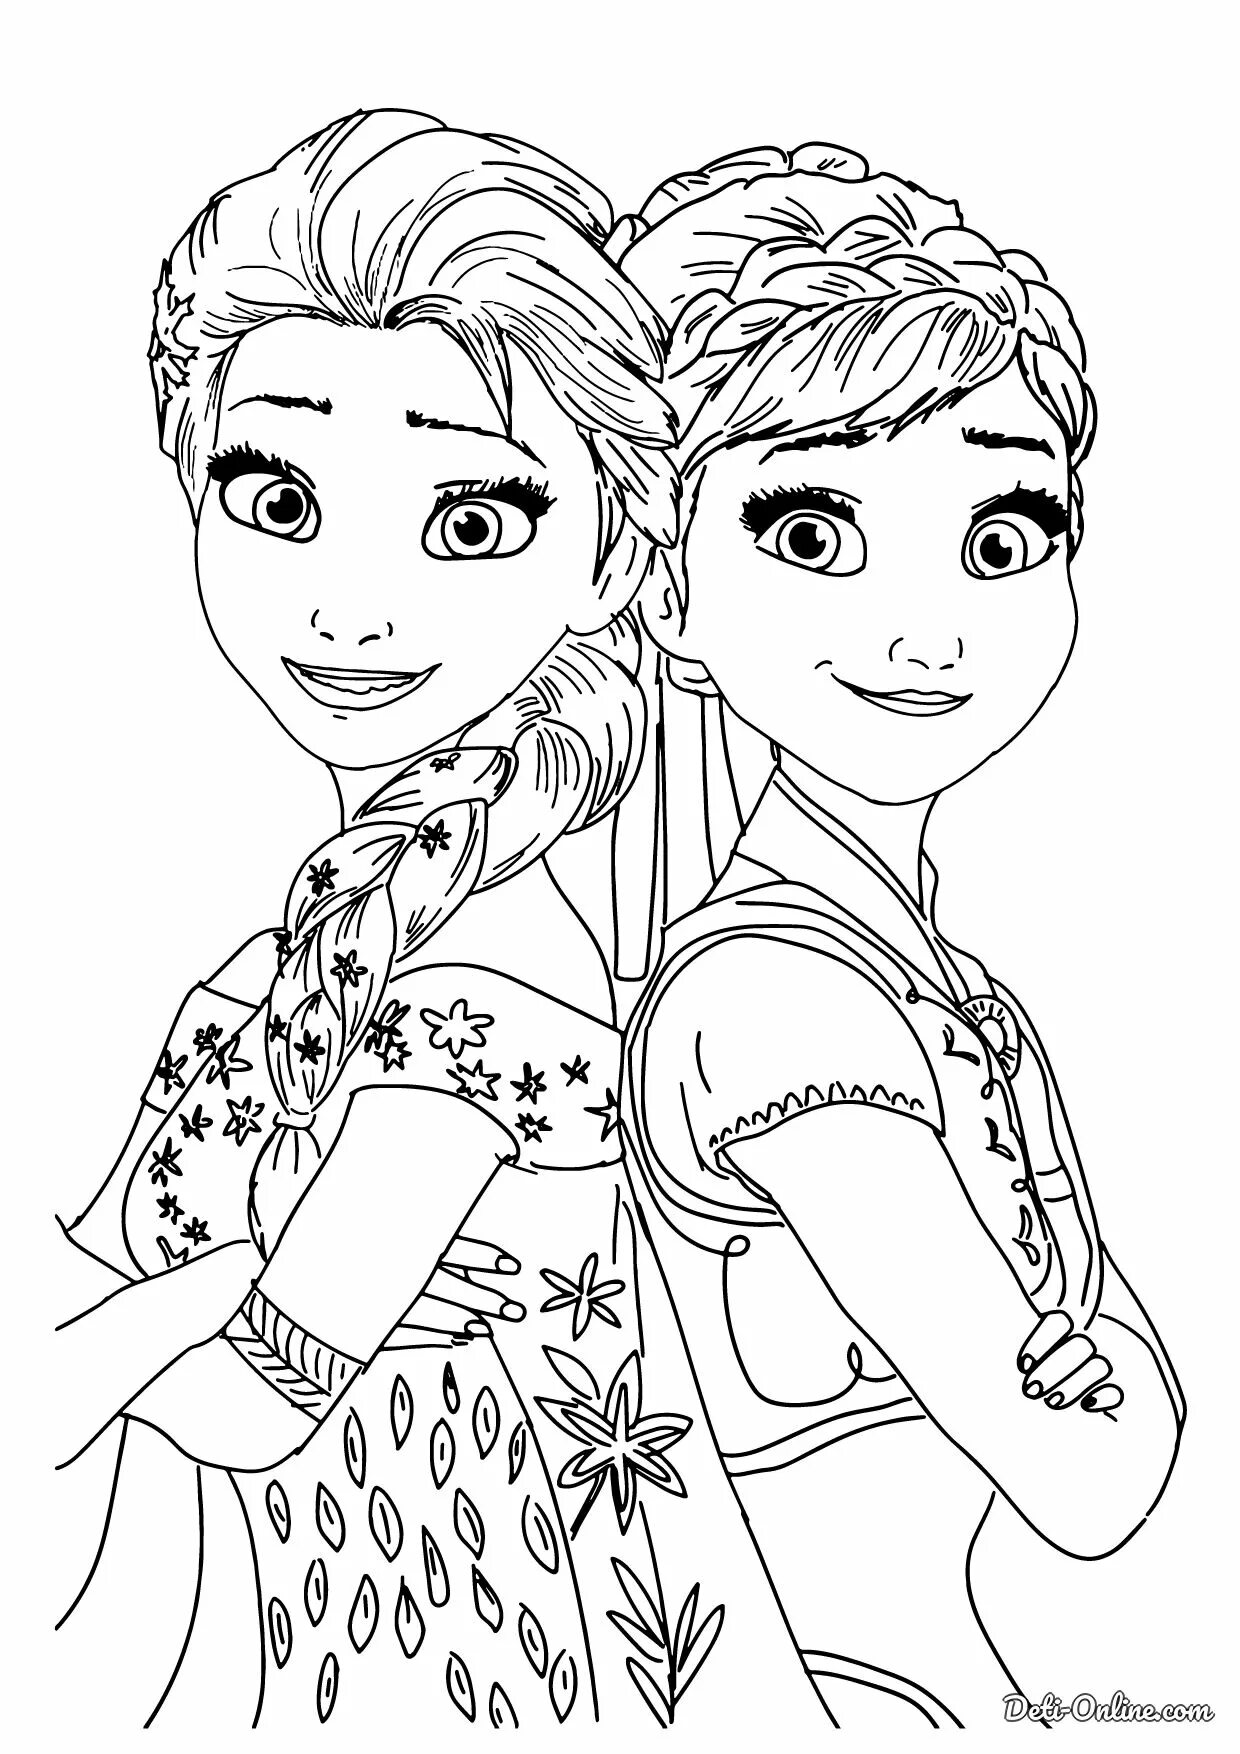 Elsa and anna in good quality #12